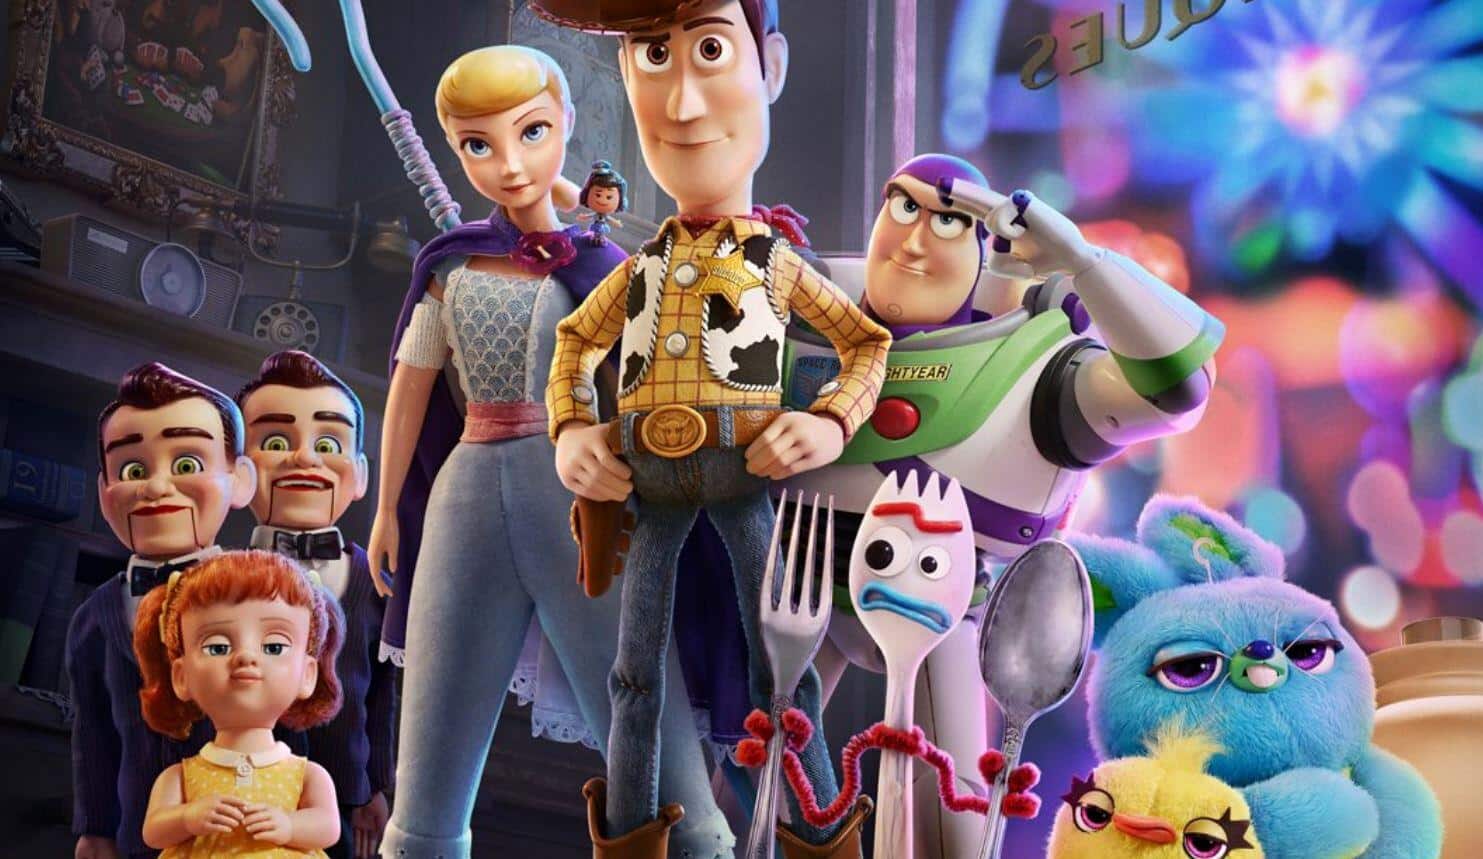 'Toy Story 4' First Full Trailer Has Finally Arrived